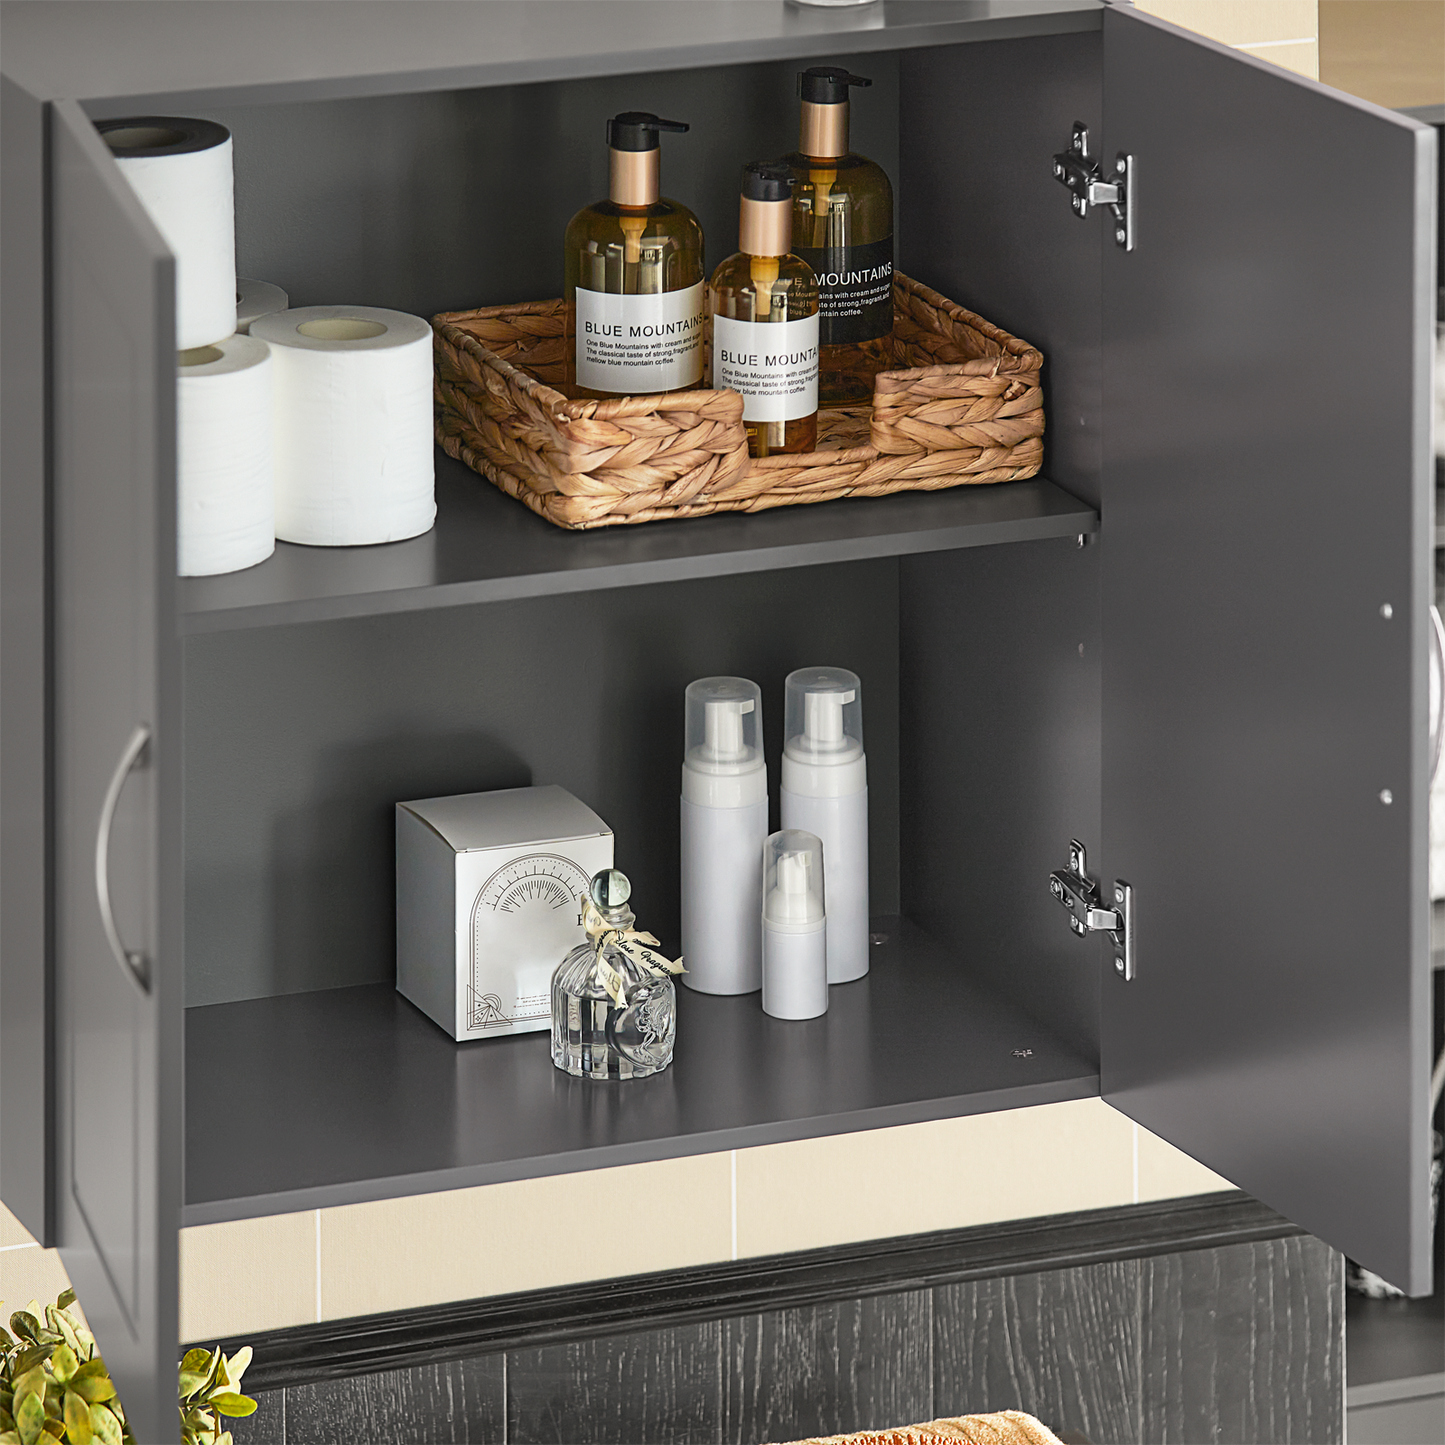 SoBuy Wall Storage Cabinet Unit with Double Doors,Kitchen Bathroom Wall Cabinet,Garage or Laundry Room Grey